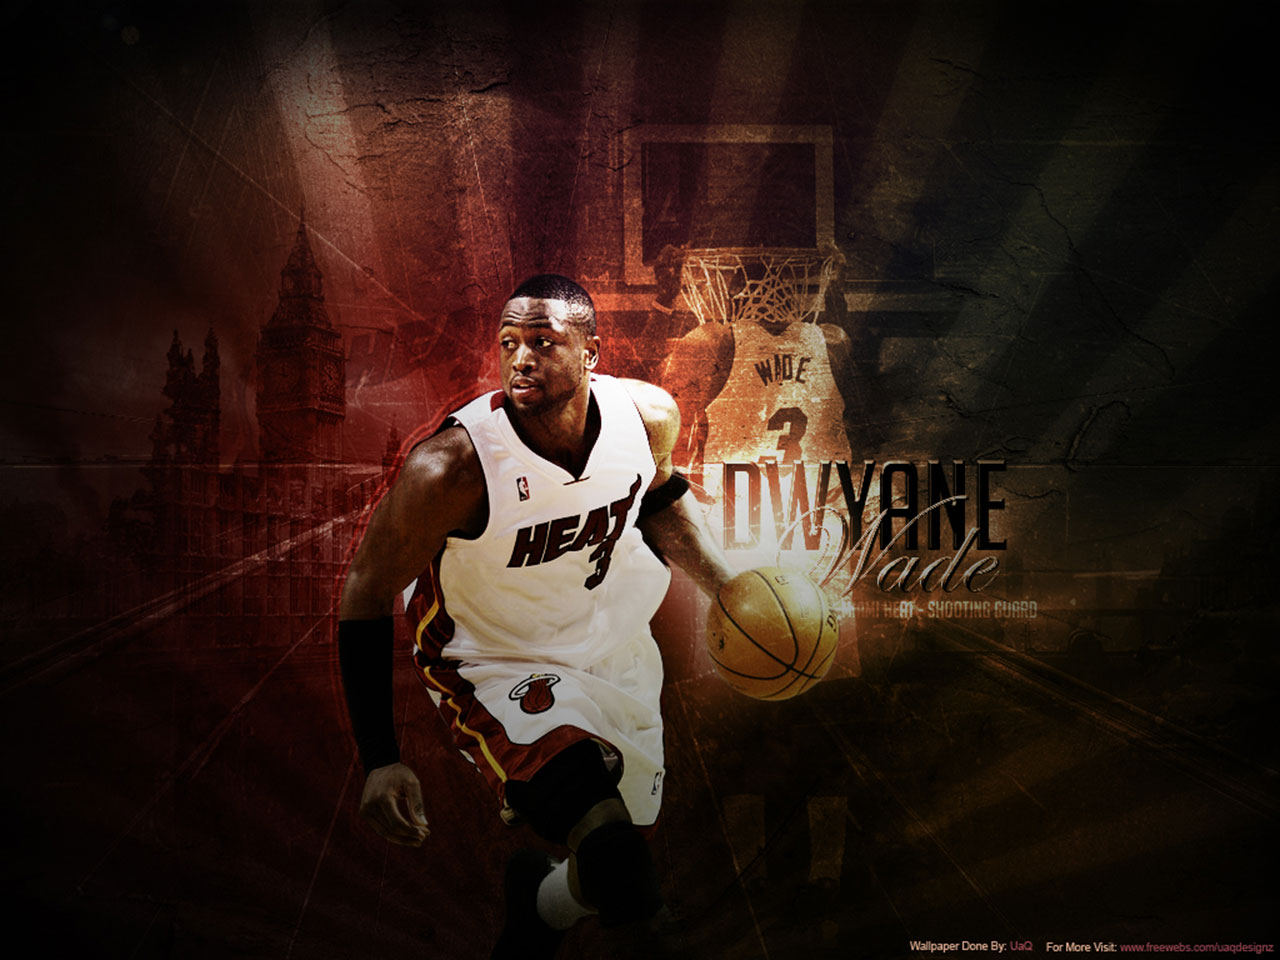 Second wallpaper of Dwayn Wade, Heat all star, for today i was asked to 